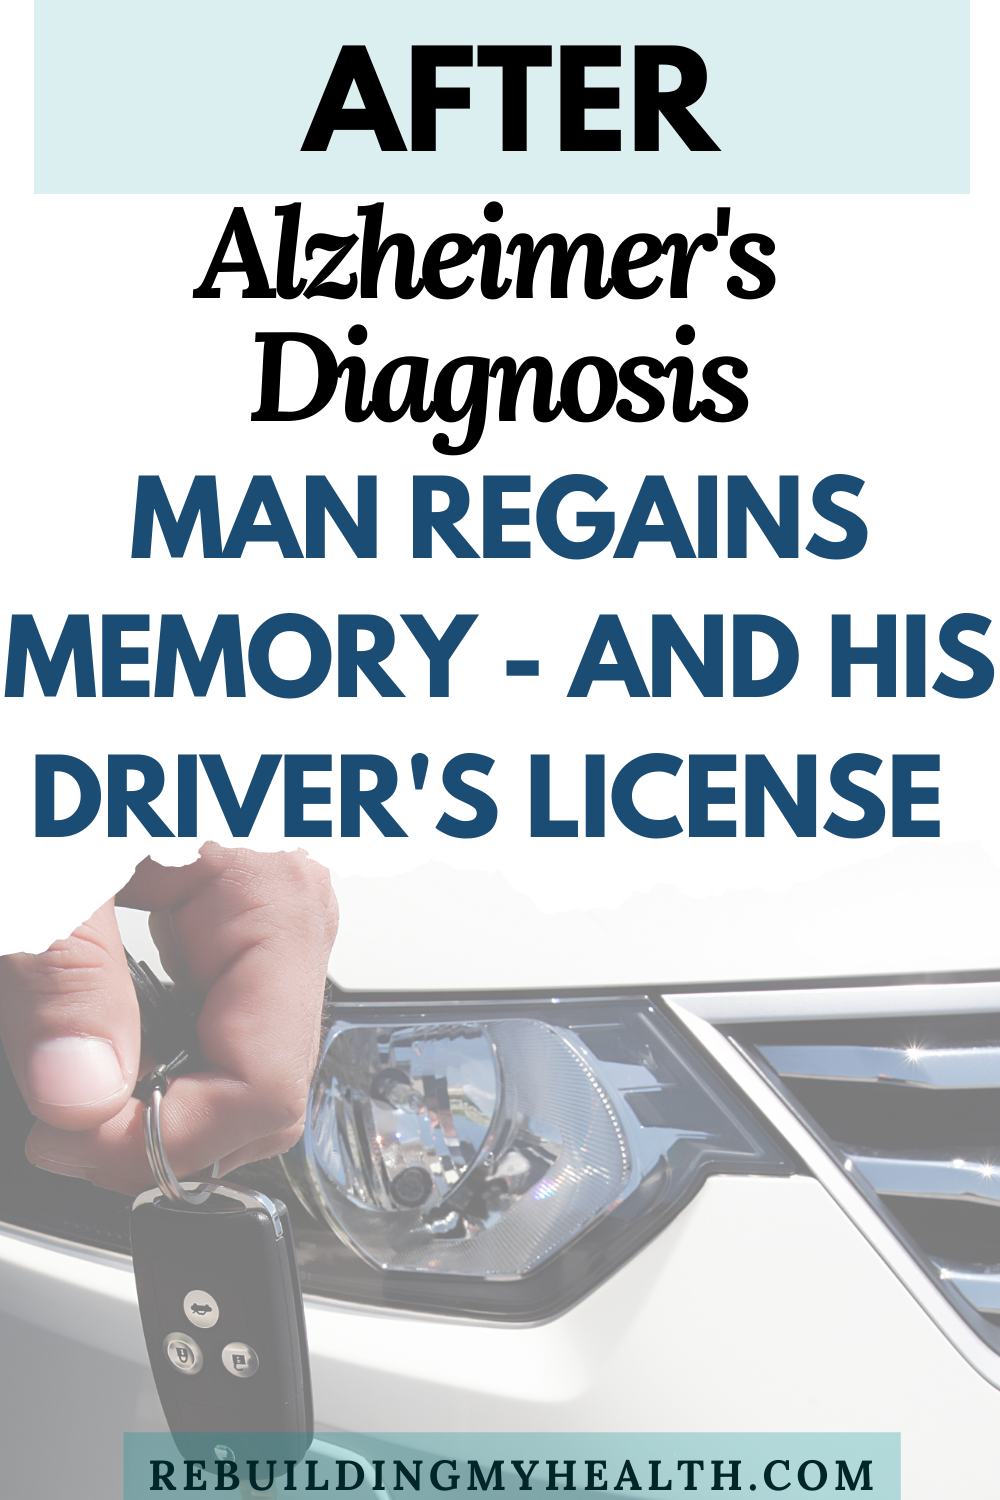 After an Alzheimer's diagnosis, lab tests uncovered the root causes behind Ron's dementia. He tried diet, detox, hormone supplements and more - and soon regained his memory AND his revoked driver's license.